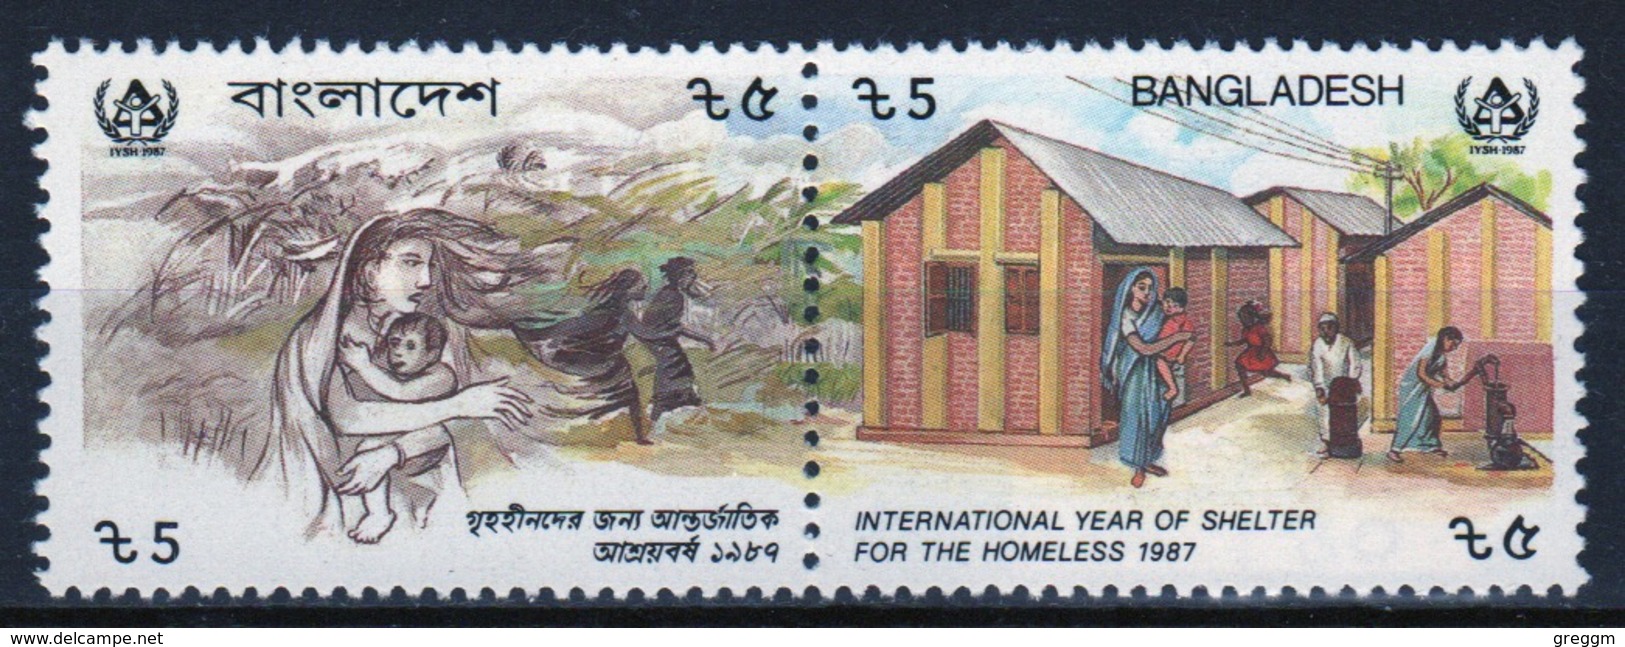 Bangladesh 1987 Set Of Stamps Issued To Celebrate International Year For The Homeless. - Bangladesh